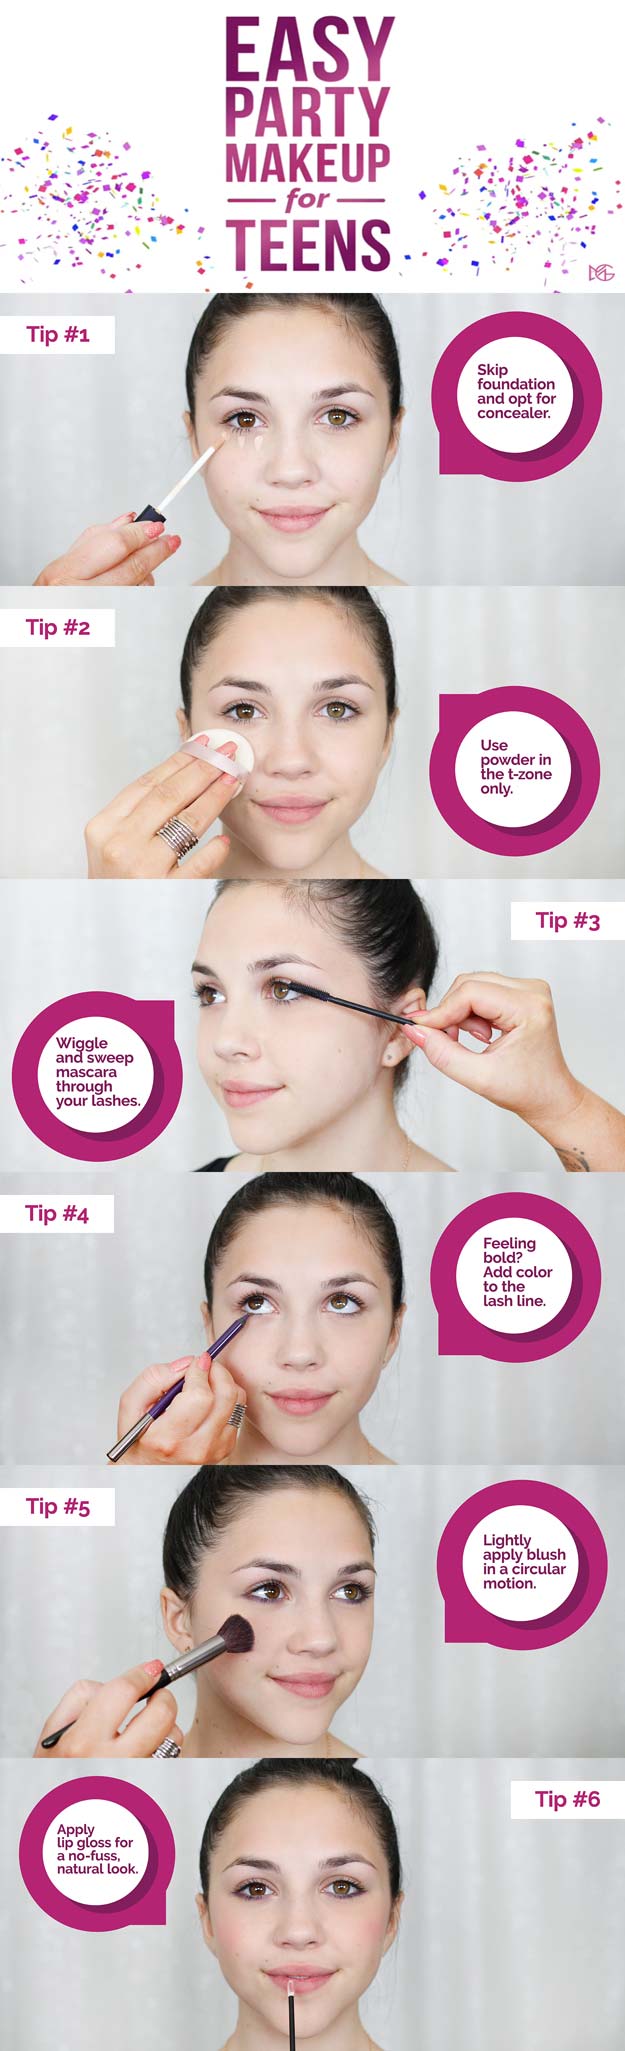 Best Makeup Tutorials for Teens -Easy Makeup Artist for Teens - Easy Makeup Ideas for Beginners - Step by Step Tutorials for Foundation, Eye Shadow, Lipstick, Cheeks, Contour, Eyebrows and Eyes - Awesome Makeup Hacks and Tips for Simple DIY Beauty - Day and Evening Looks 